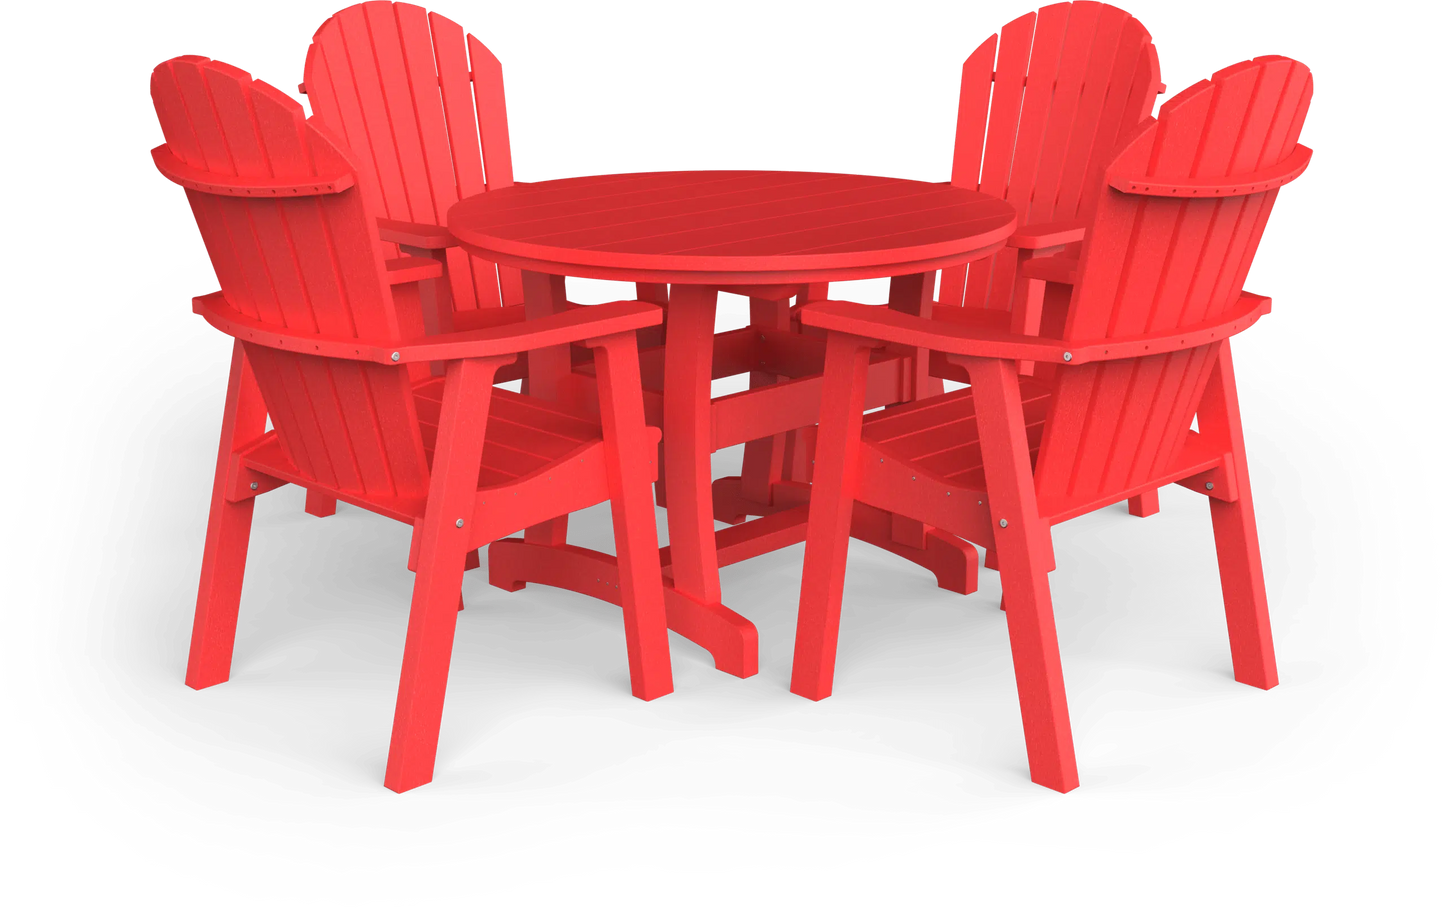 Patiova Recycled Plastic 42” Adirondack Round 5 Piece Dining Set - LEAD TIME TO SHIP 3 WEEKS